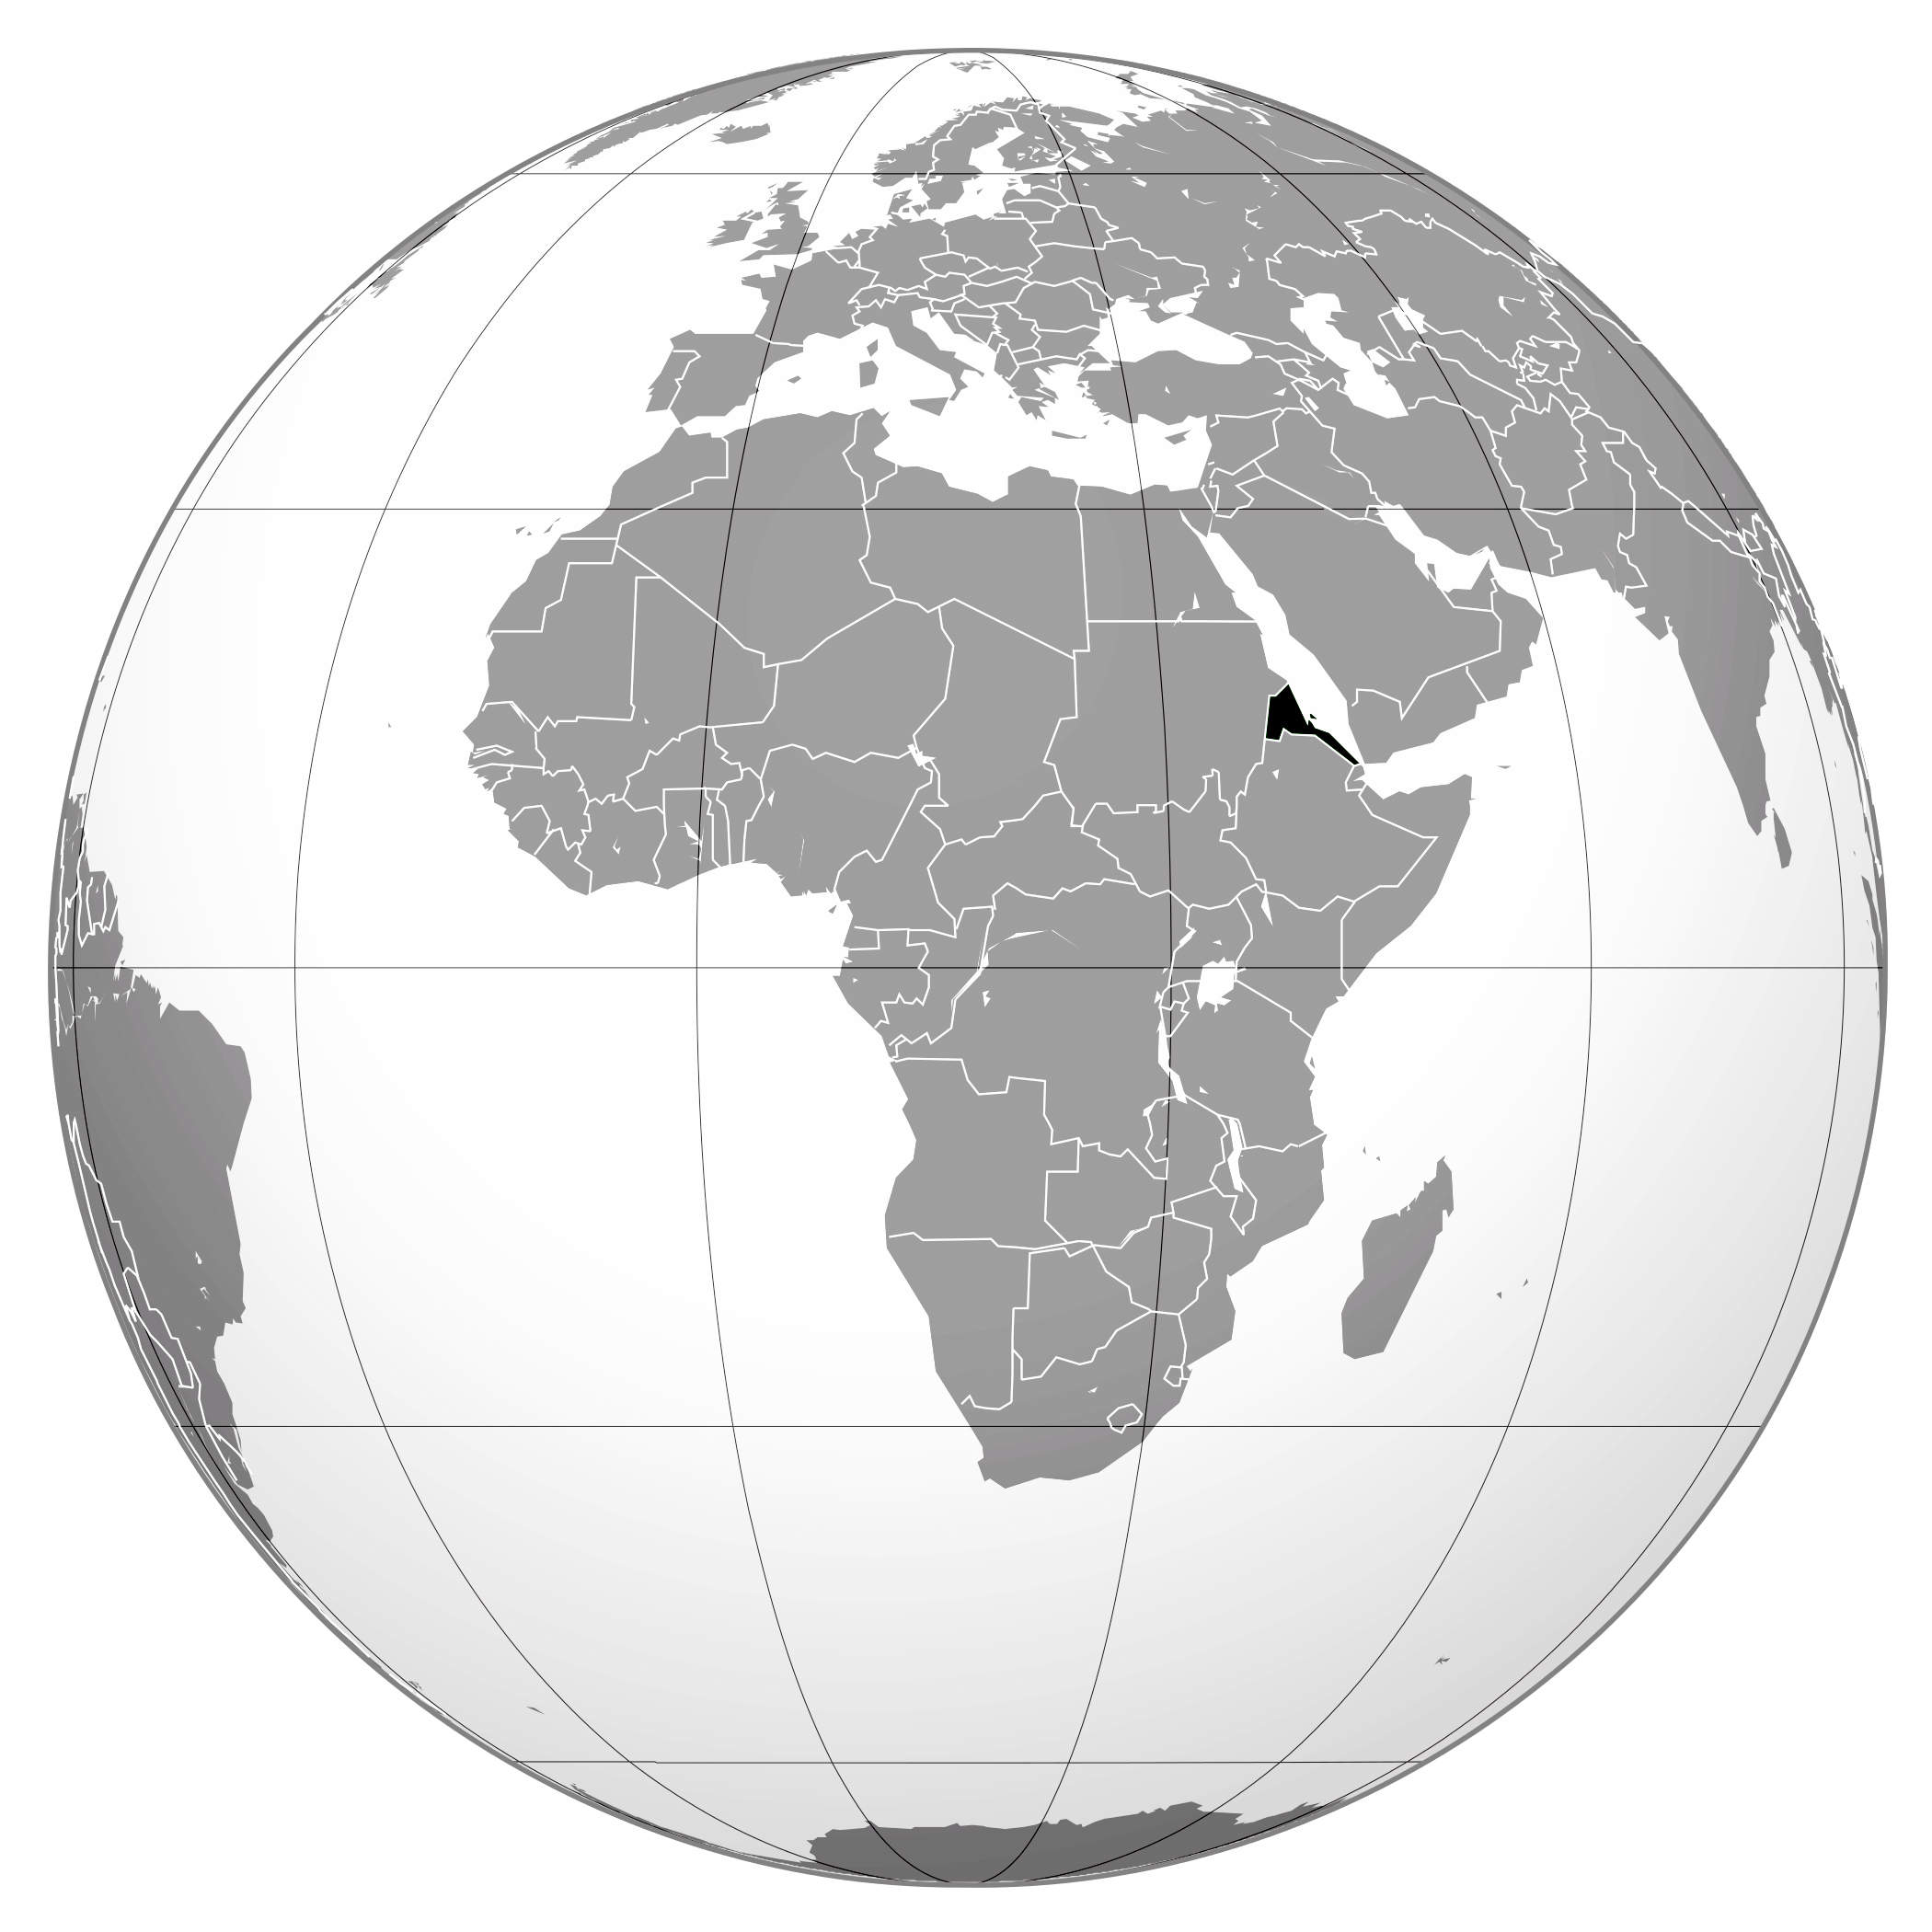 Large Location Map Of Eritrea In Africa Eritrea Africa Mapsland Maps Of The World